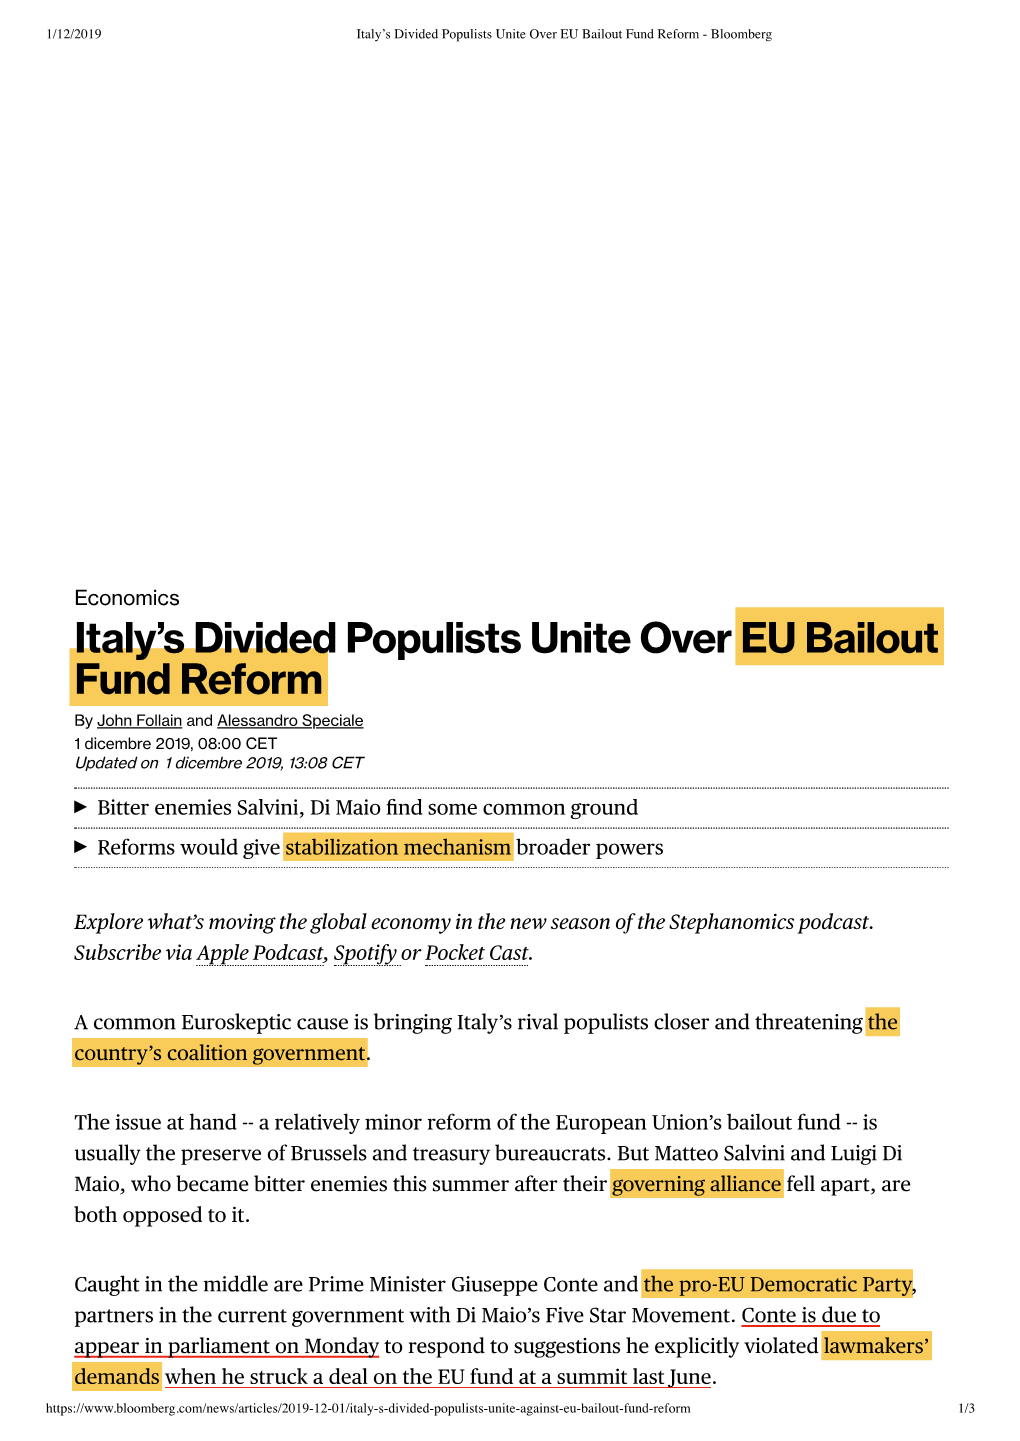 Italy's Divided Populists Unite Over EU Bailout Fund Reform